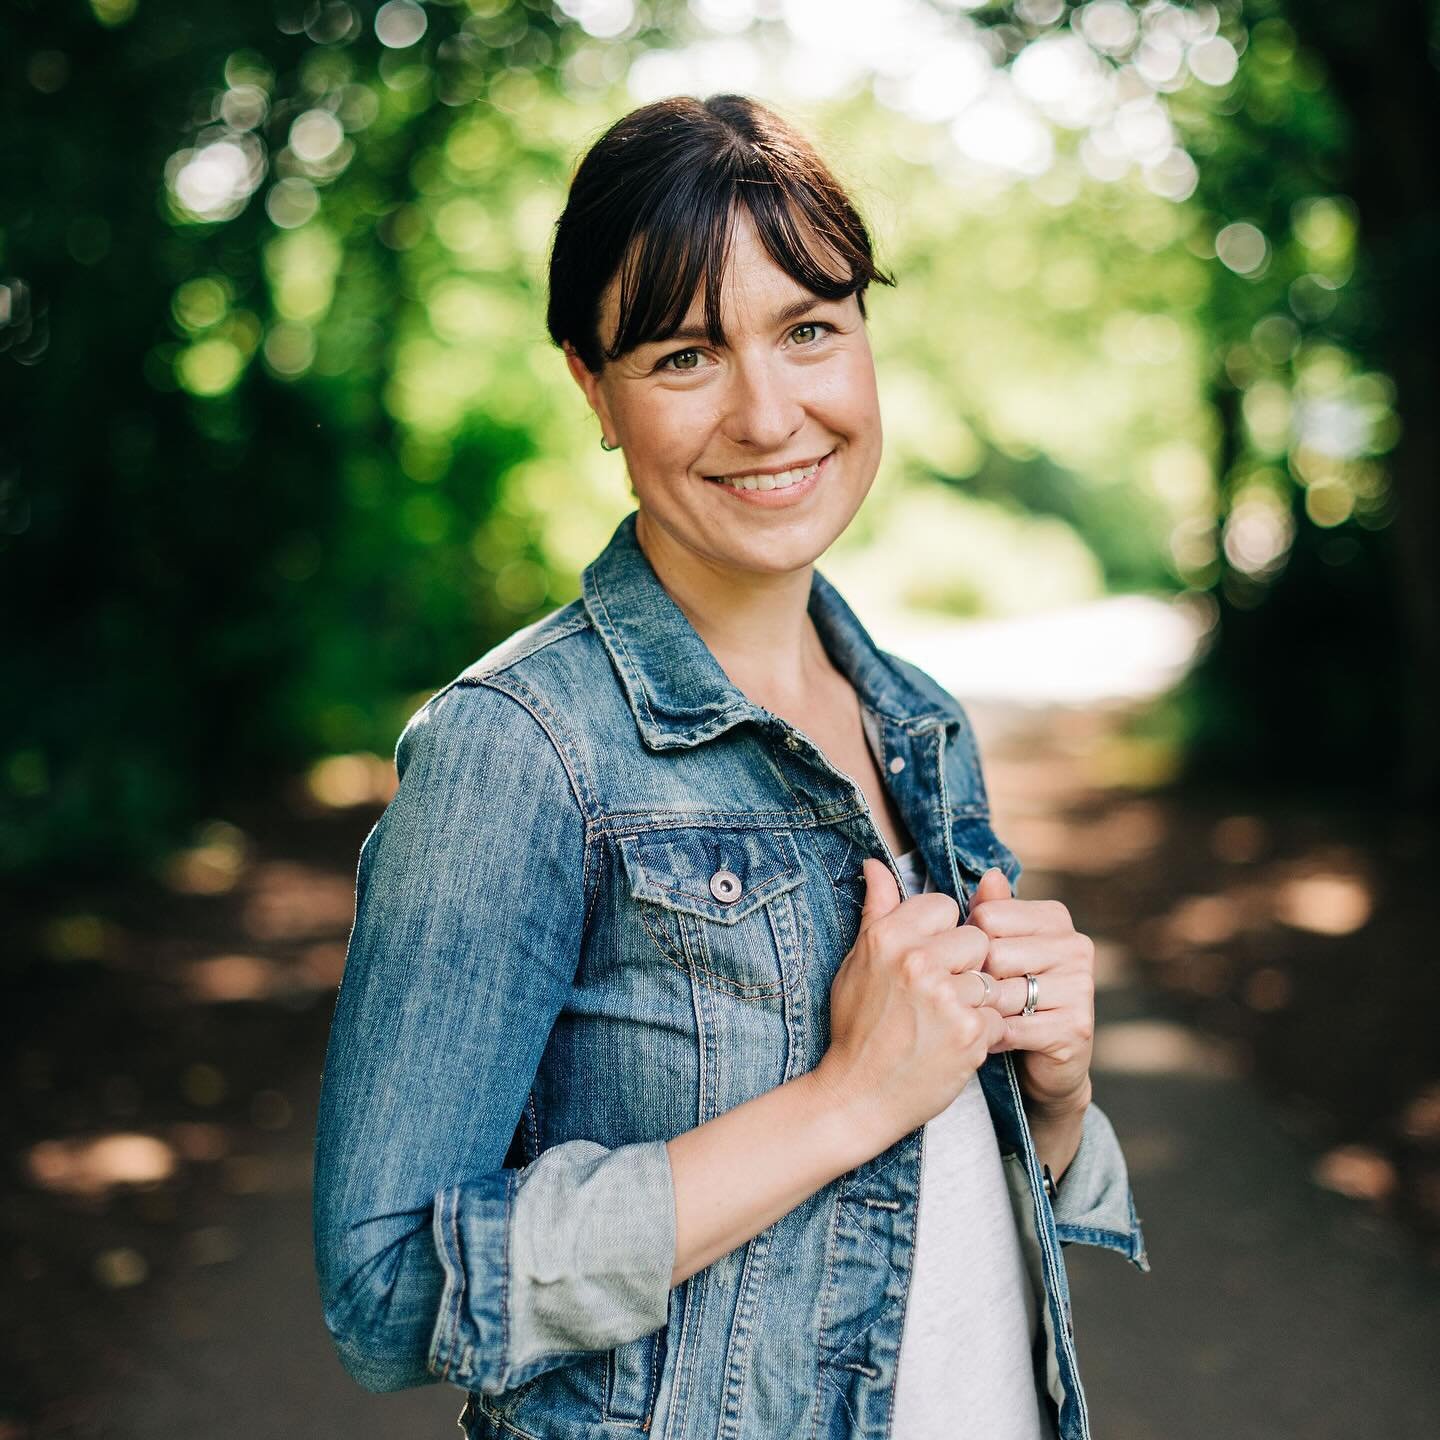 So looking forward to the summery days to come, which these photos from my last shoot with wonderful Louise (founder of @thehomeworkermag) totally transport me to.

These pics also show what a beautiful variety of images you can make in a short space